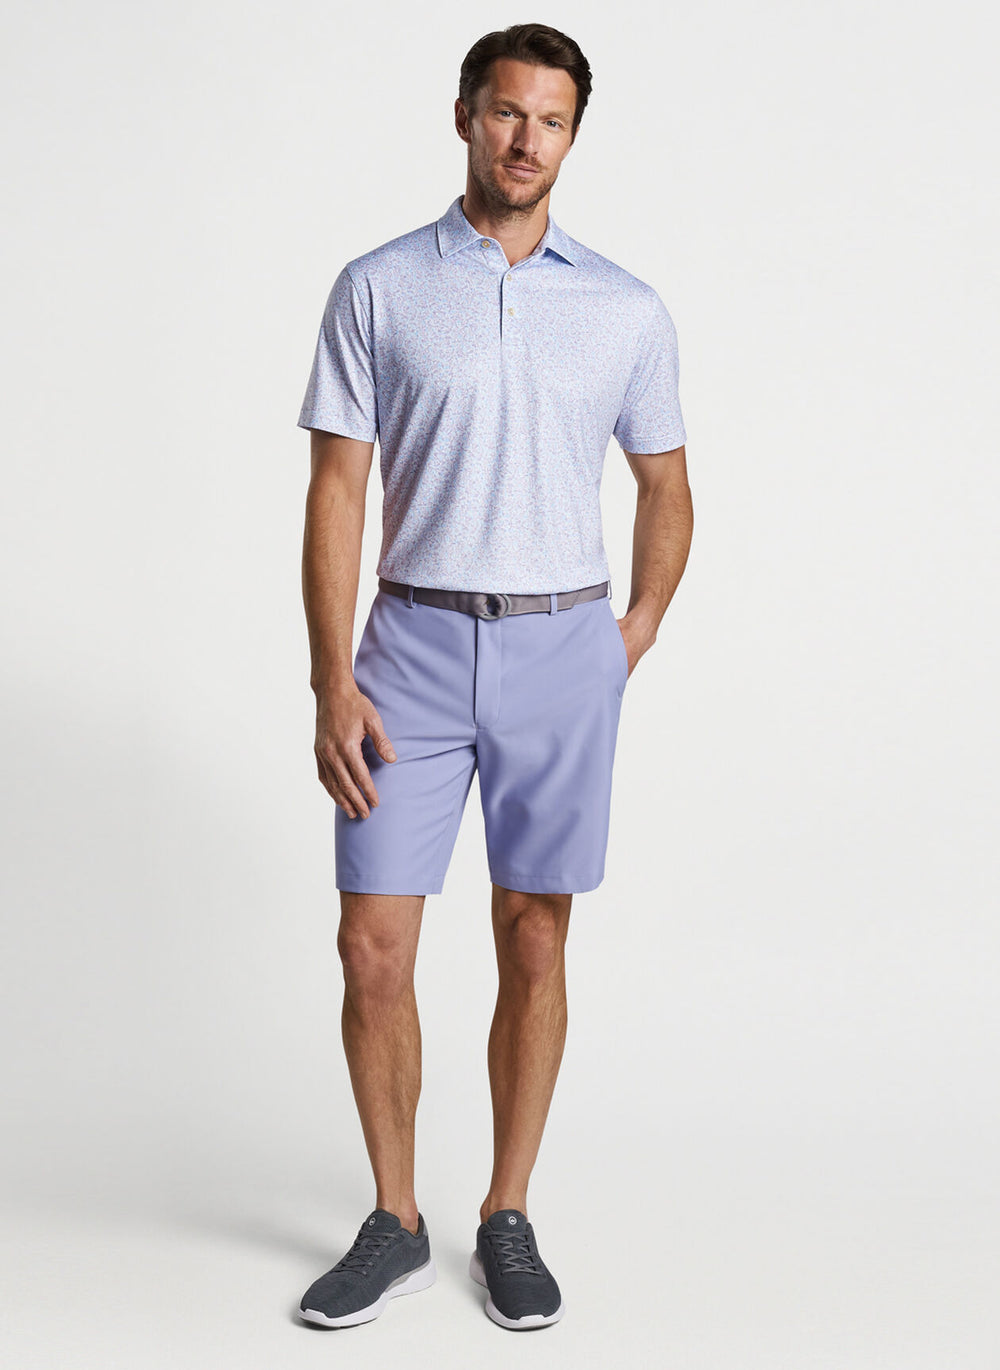 Peter Millar Dazed And Transfused Performance Jersey Polo In White / Lavender Fog